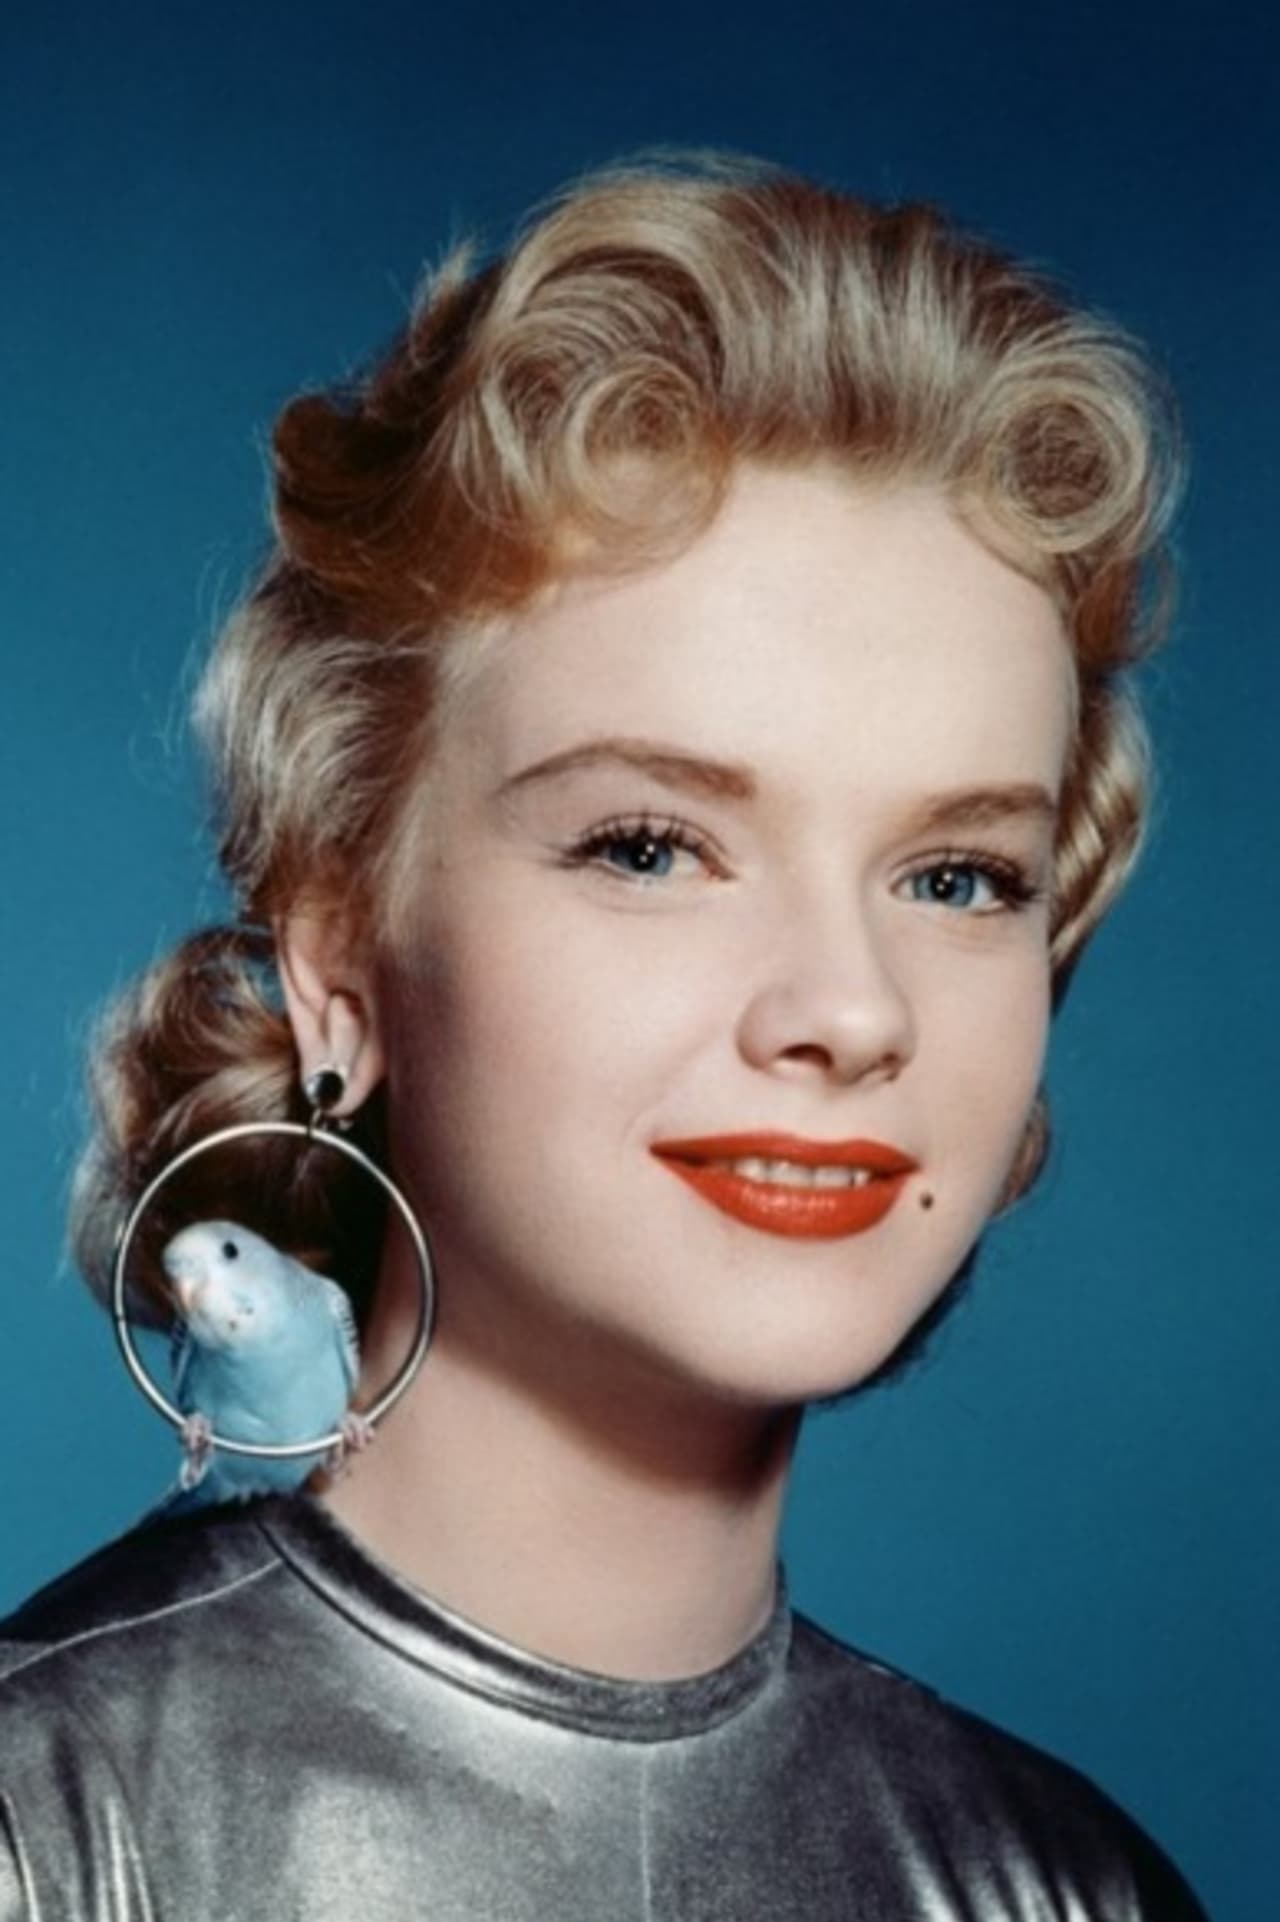 Ossining native Anne Francis was a television pioneer as the woman detective "Honey West."